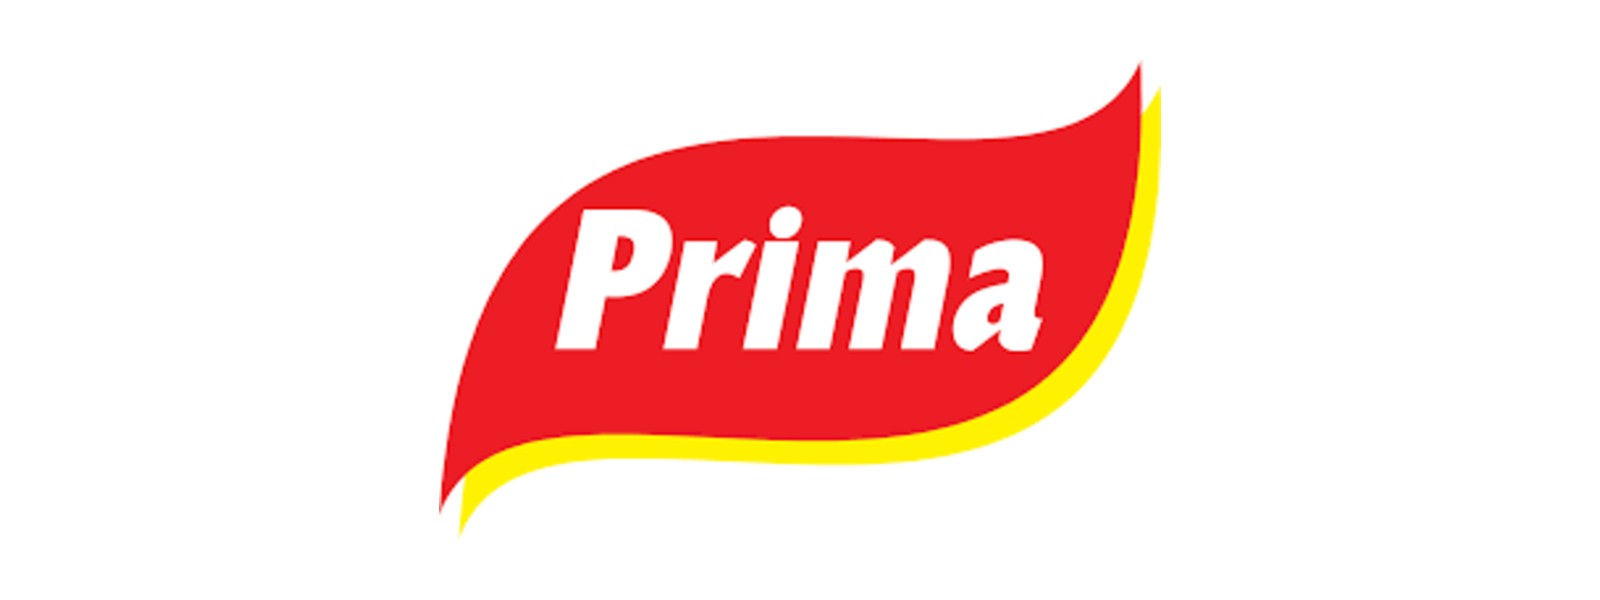 Prima increases Wheat Flour (01 kg) price by Rs. 12/-